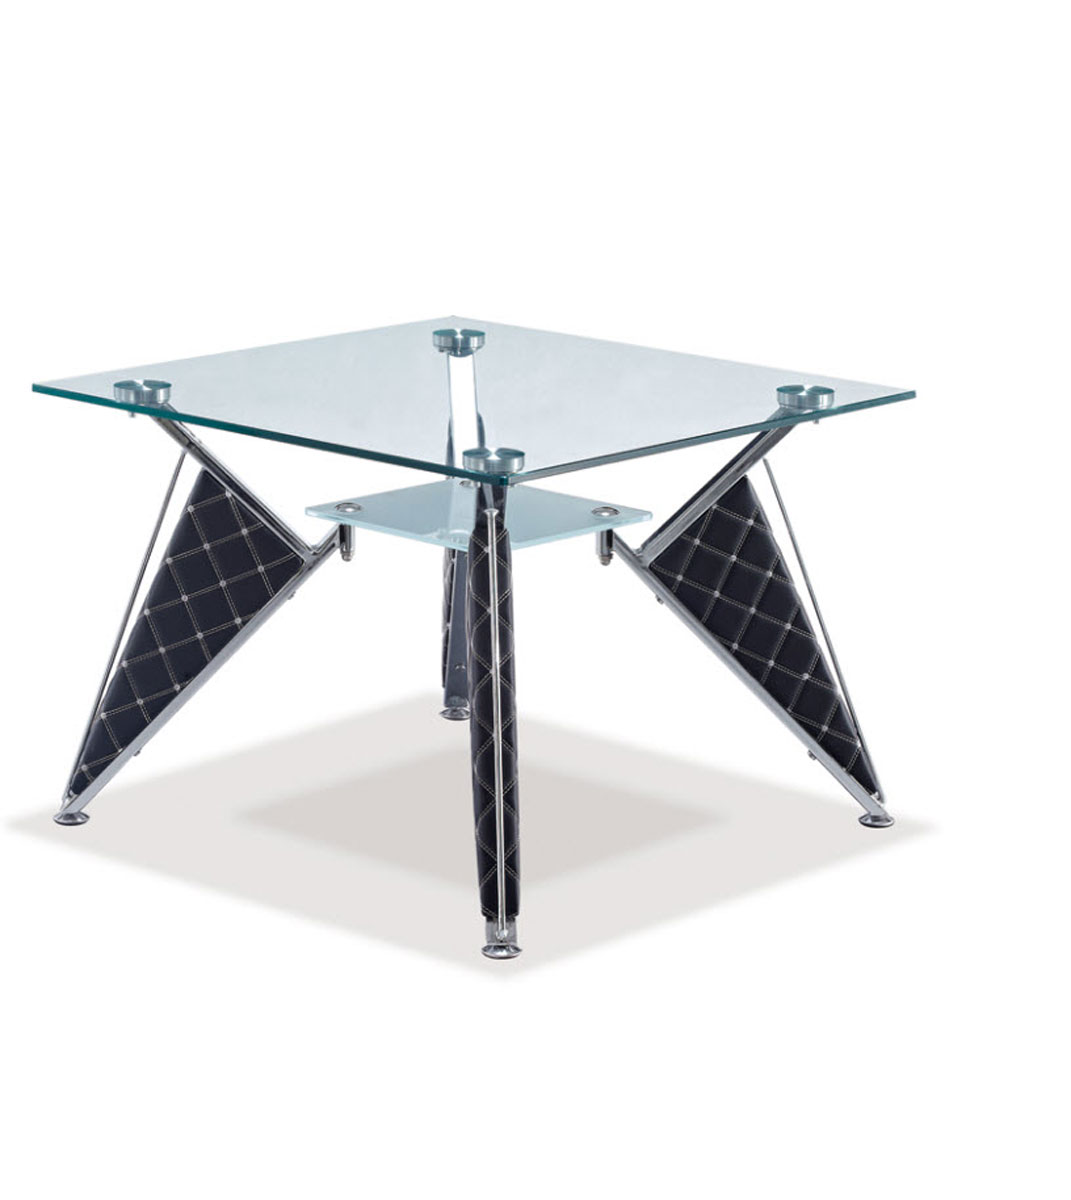 Global Furniture USA A107 End Table - Frosted Glass- Silver/Black/Metal/Vinyl Legs